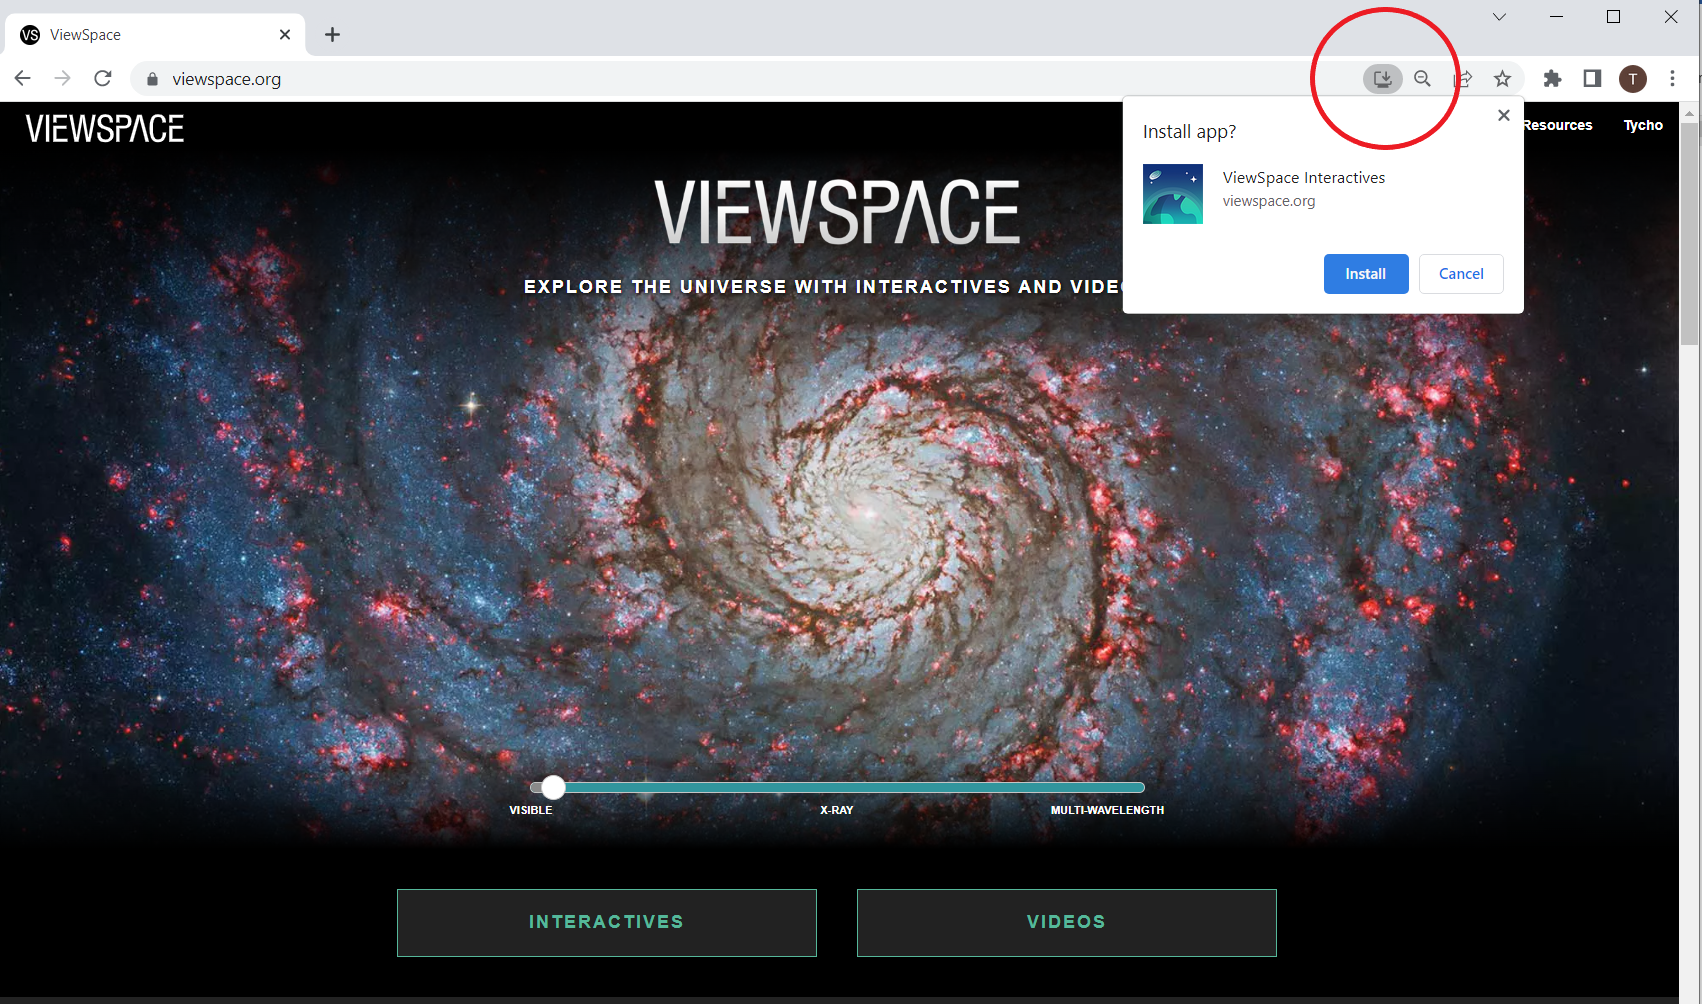 Screenshot of the ViewSpace home screen on Google Chrome. On the browser bar at the top right, a download icon is circled in red. Below the icon is a popup with the words "Install app? ViewSpace Interactives" along with a blue button on the bottom right labeled Install.